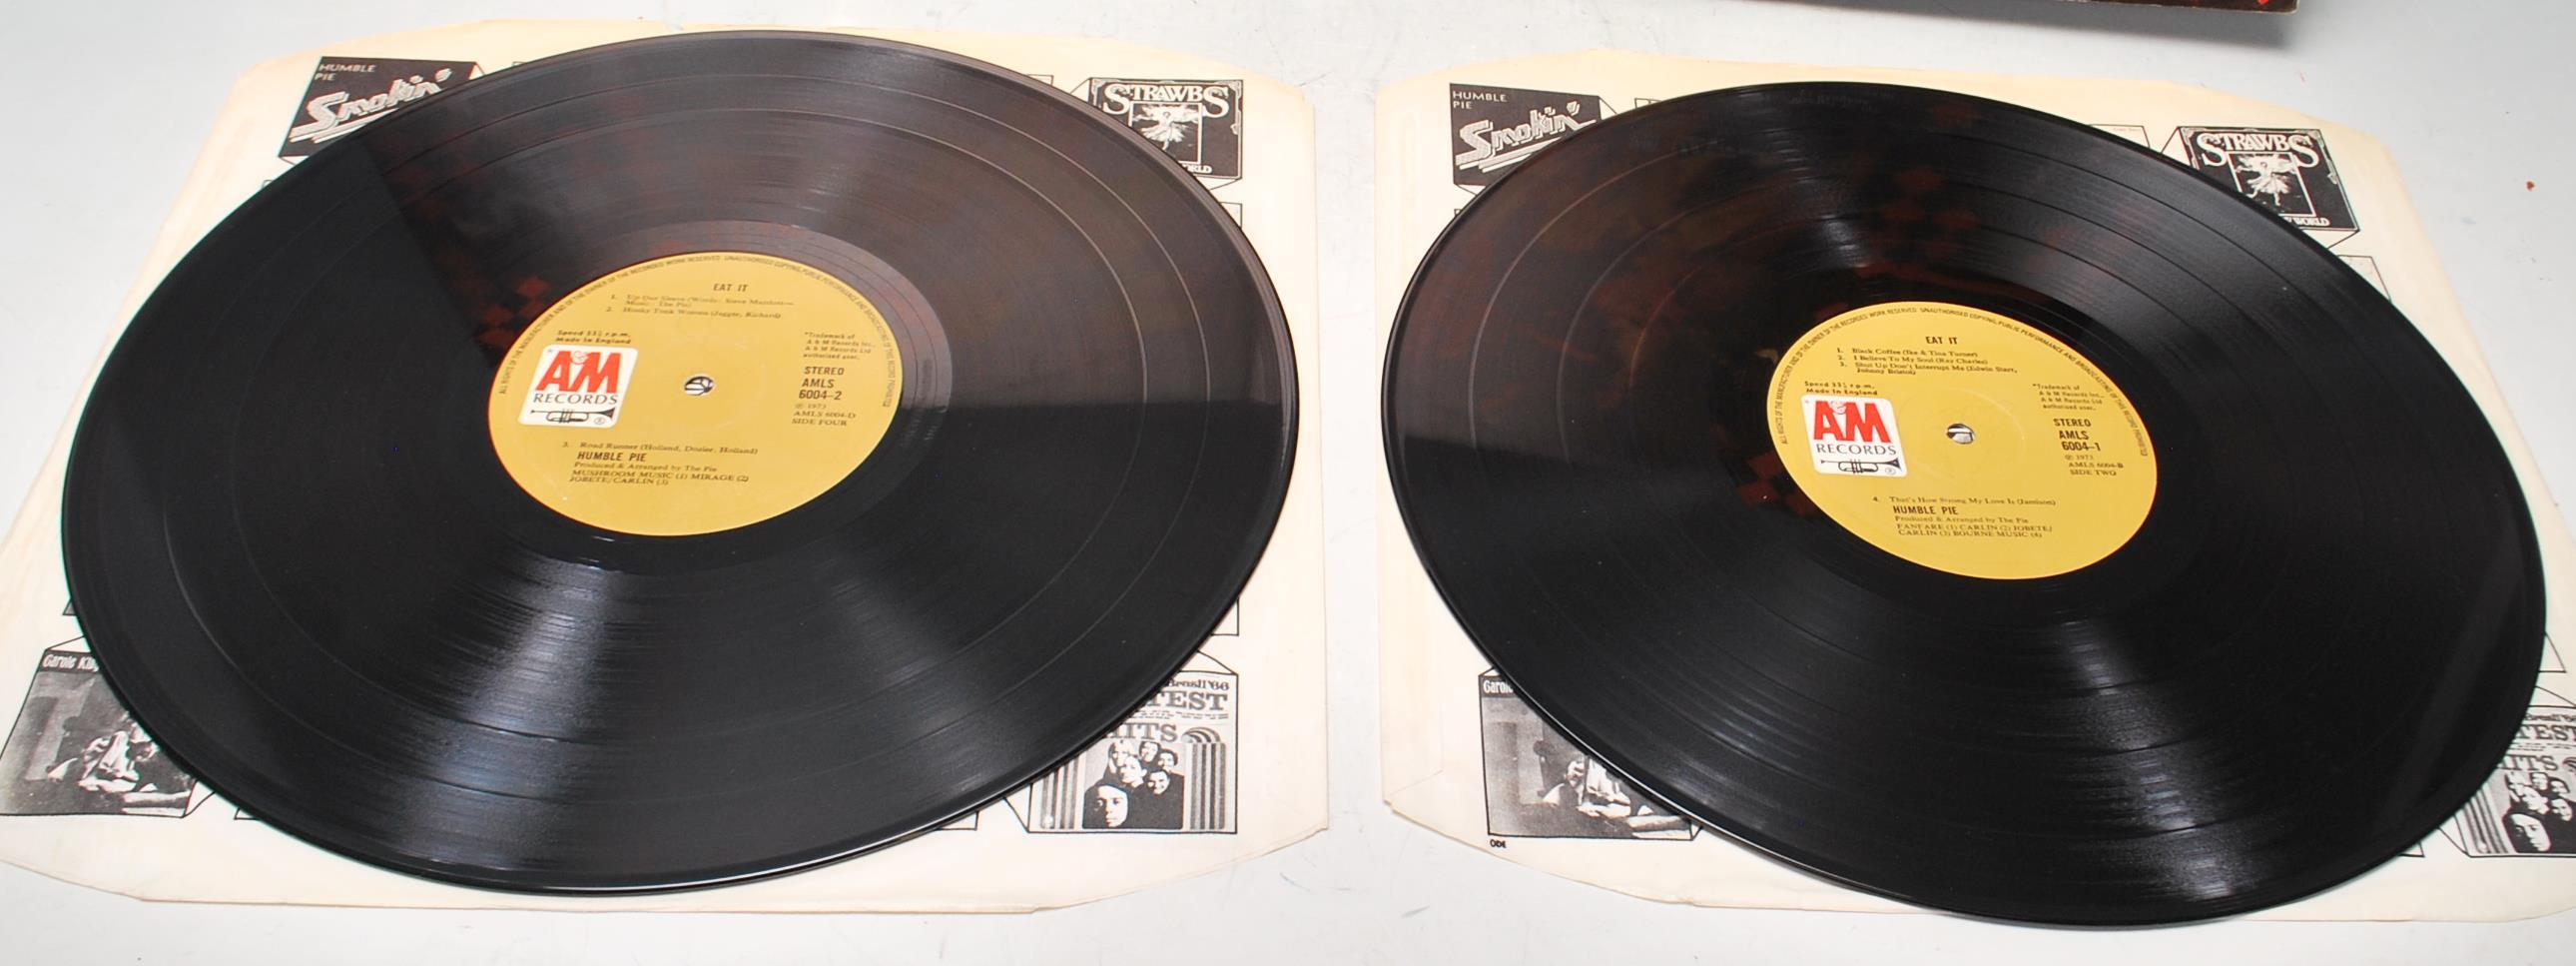 HUMBLE PIE - TWO VINYL RECORD LPS - EAT IT & ROCKIN' THE FILLMORE - Image 4 of 9